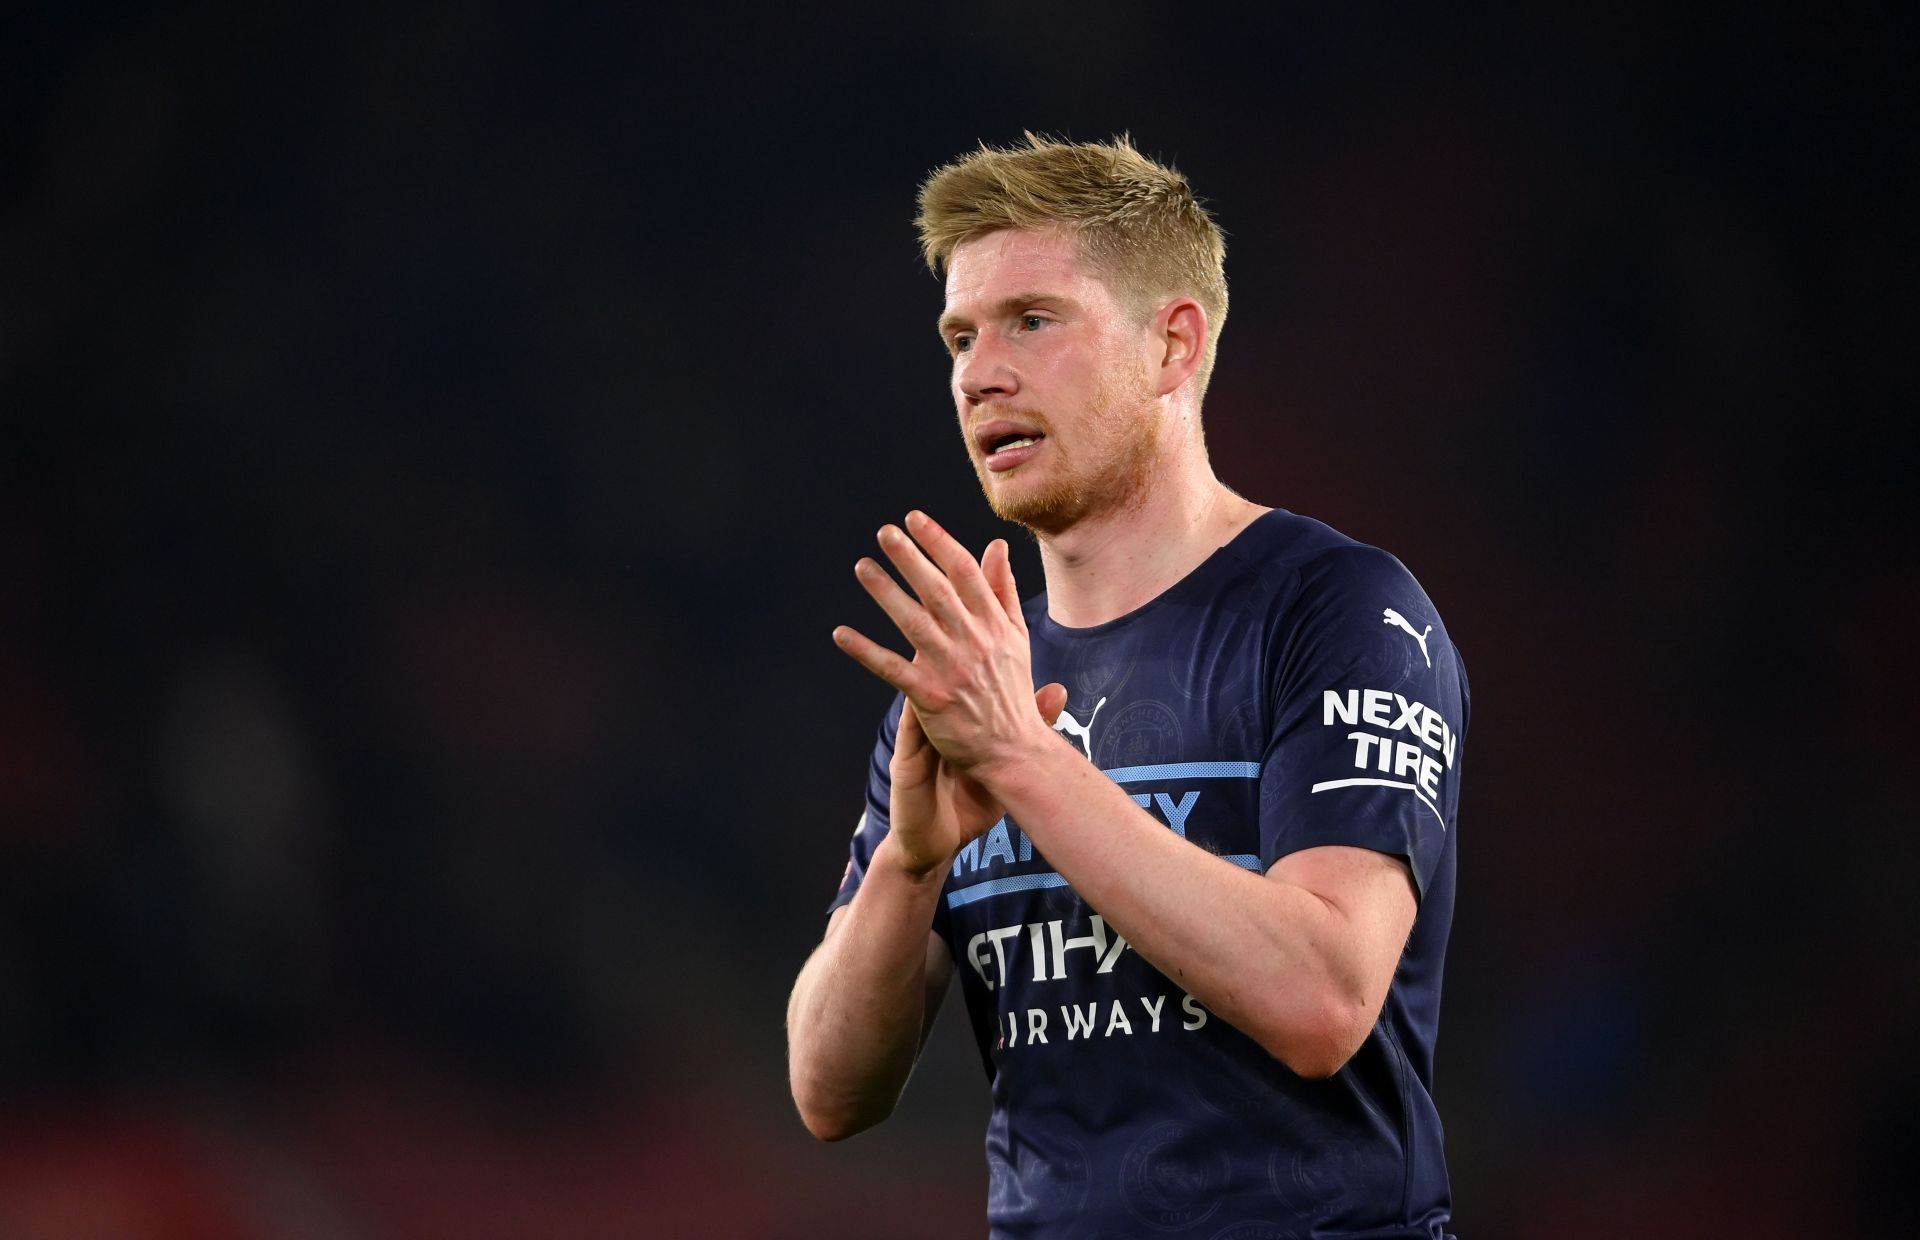 Kevin De Bruyne is one of the longest-serving players at Manchester City.